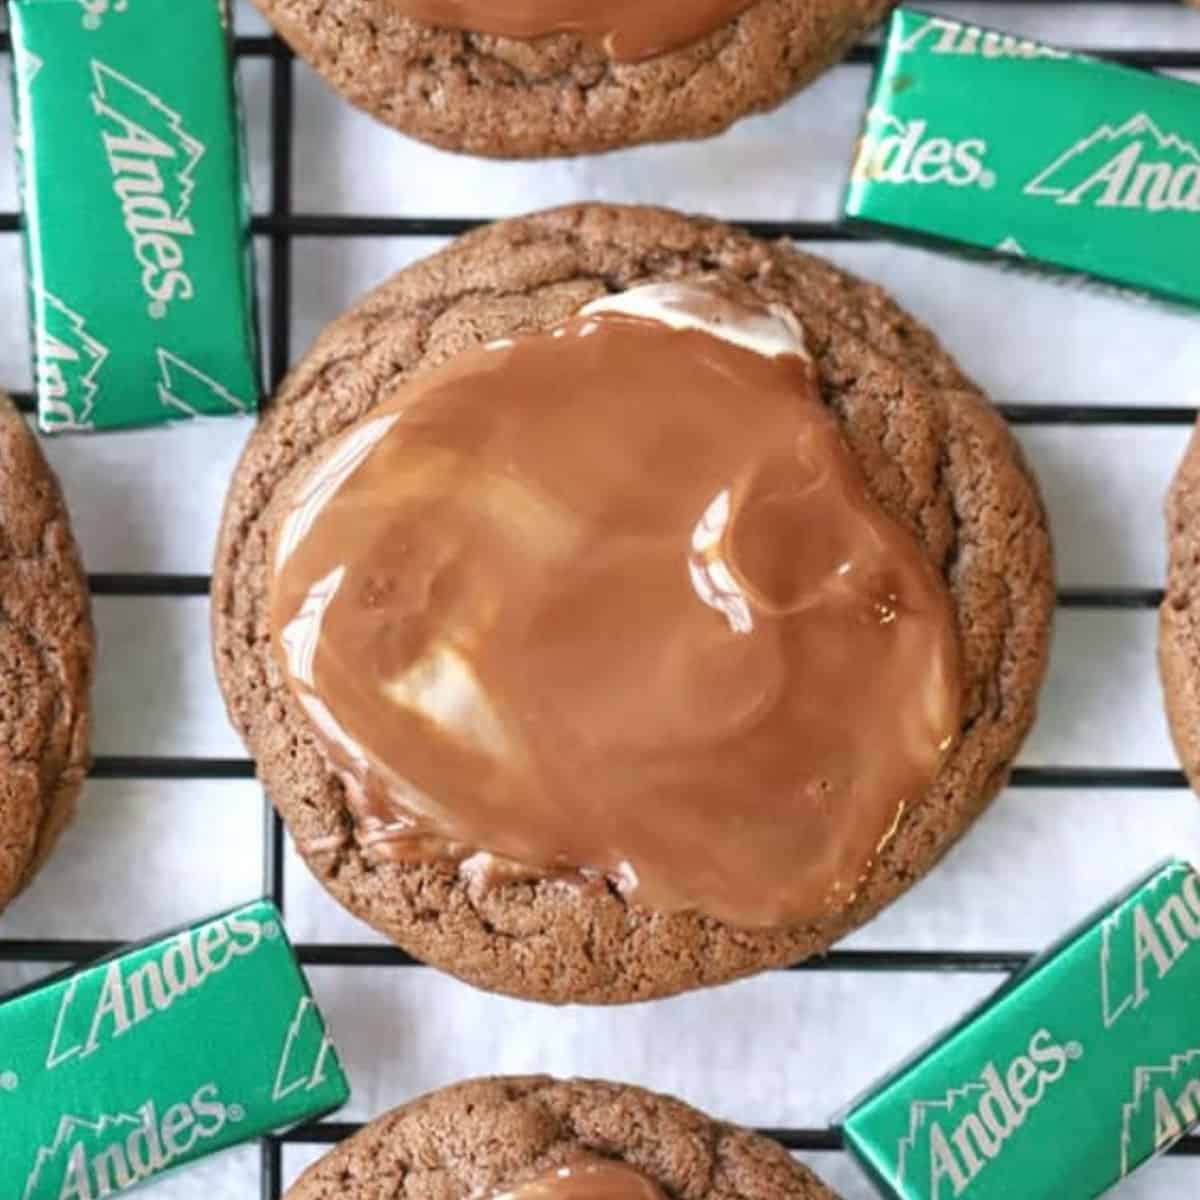 andes mint cookies on a cooling cookie rack